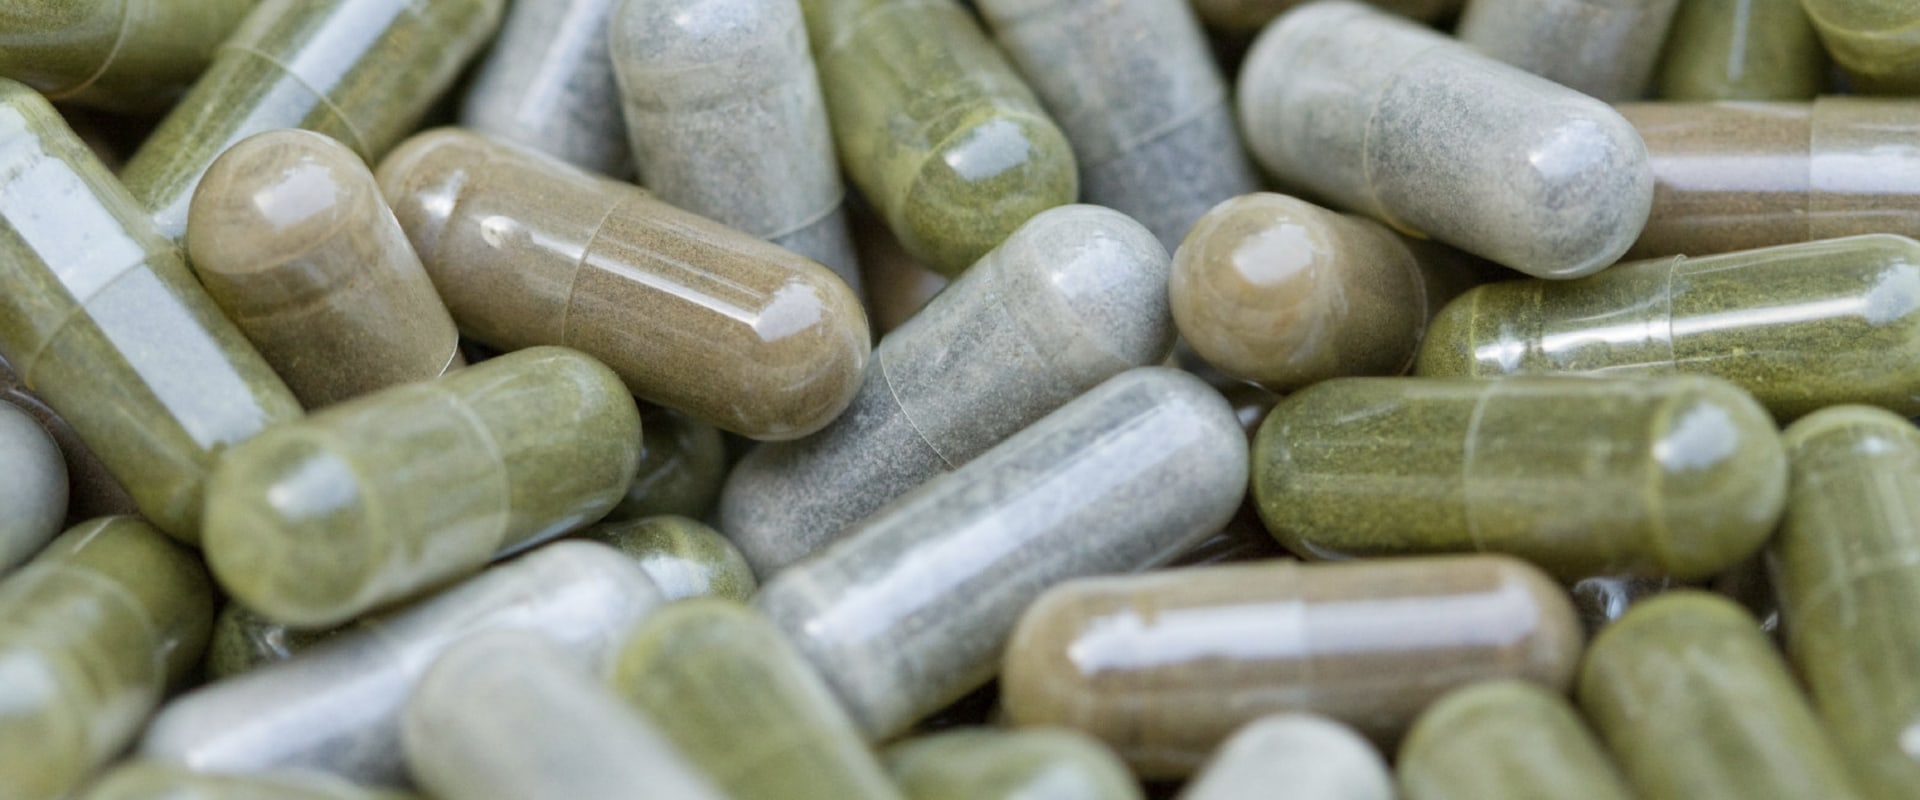 Are There Any Long-Term Effects of Taking Health Supplements?